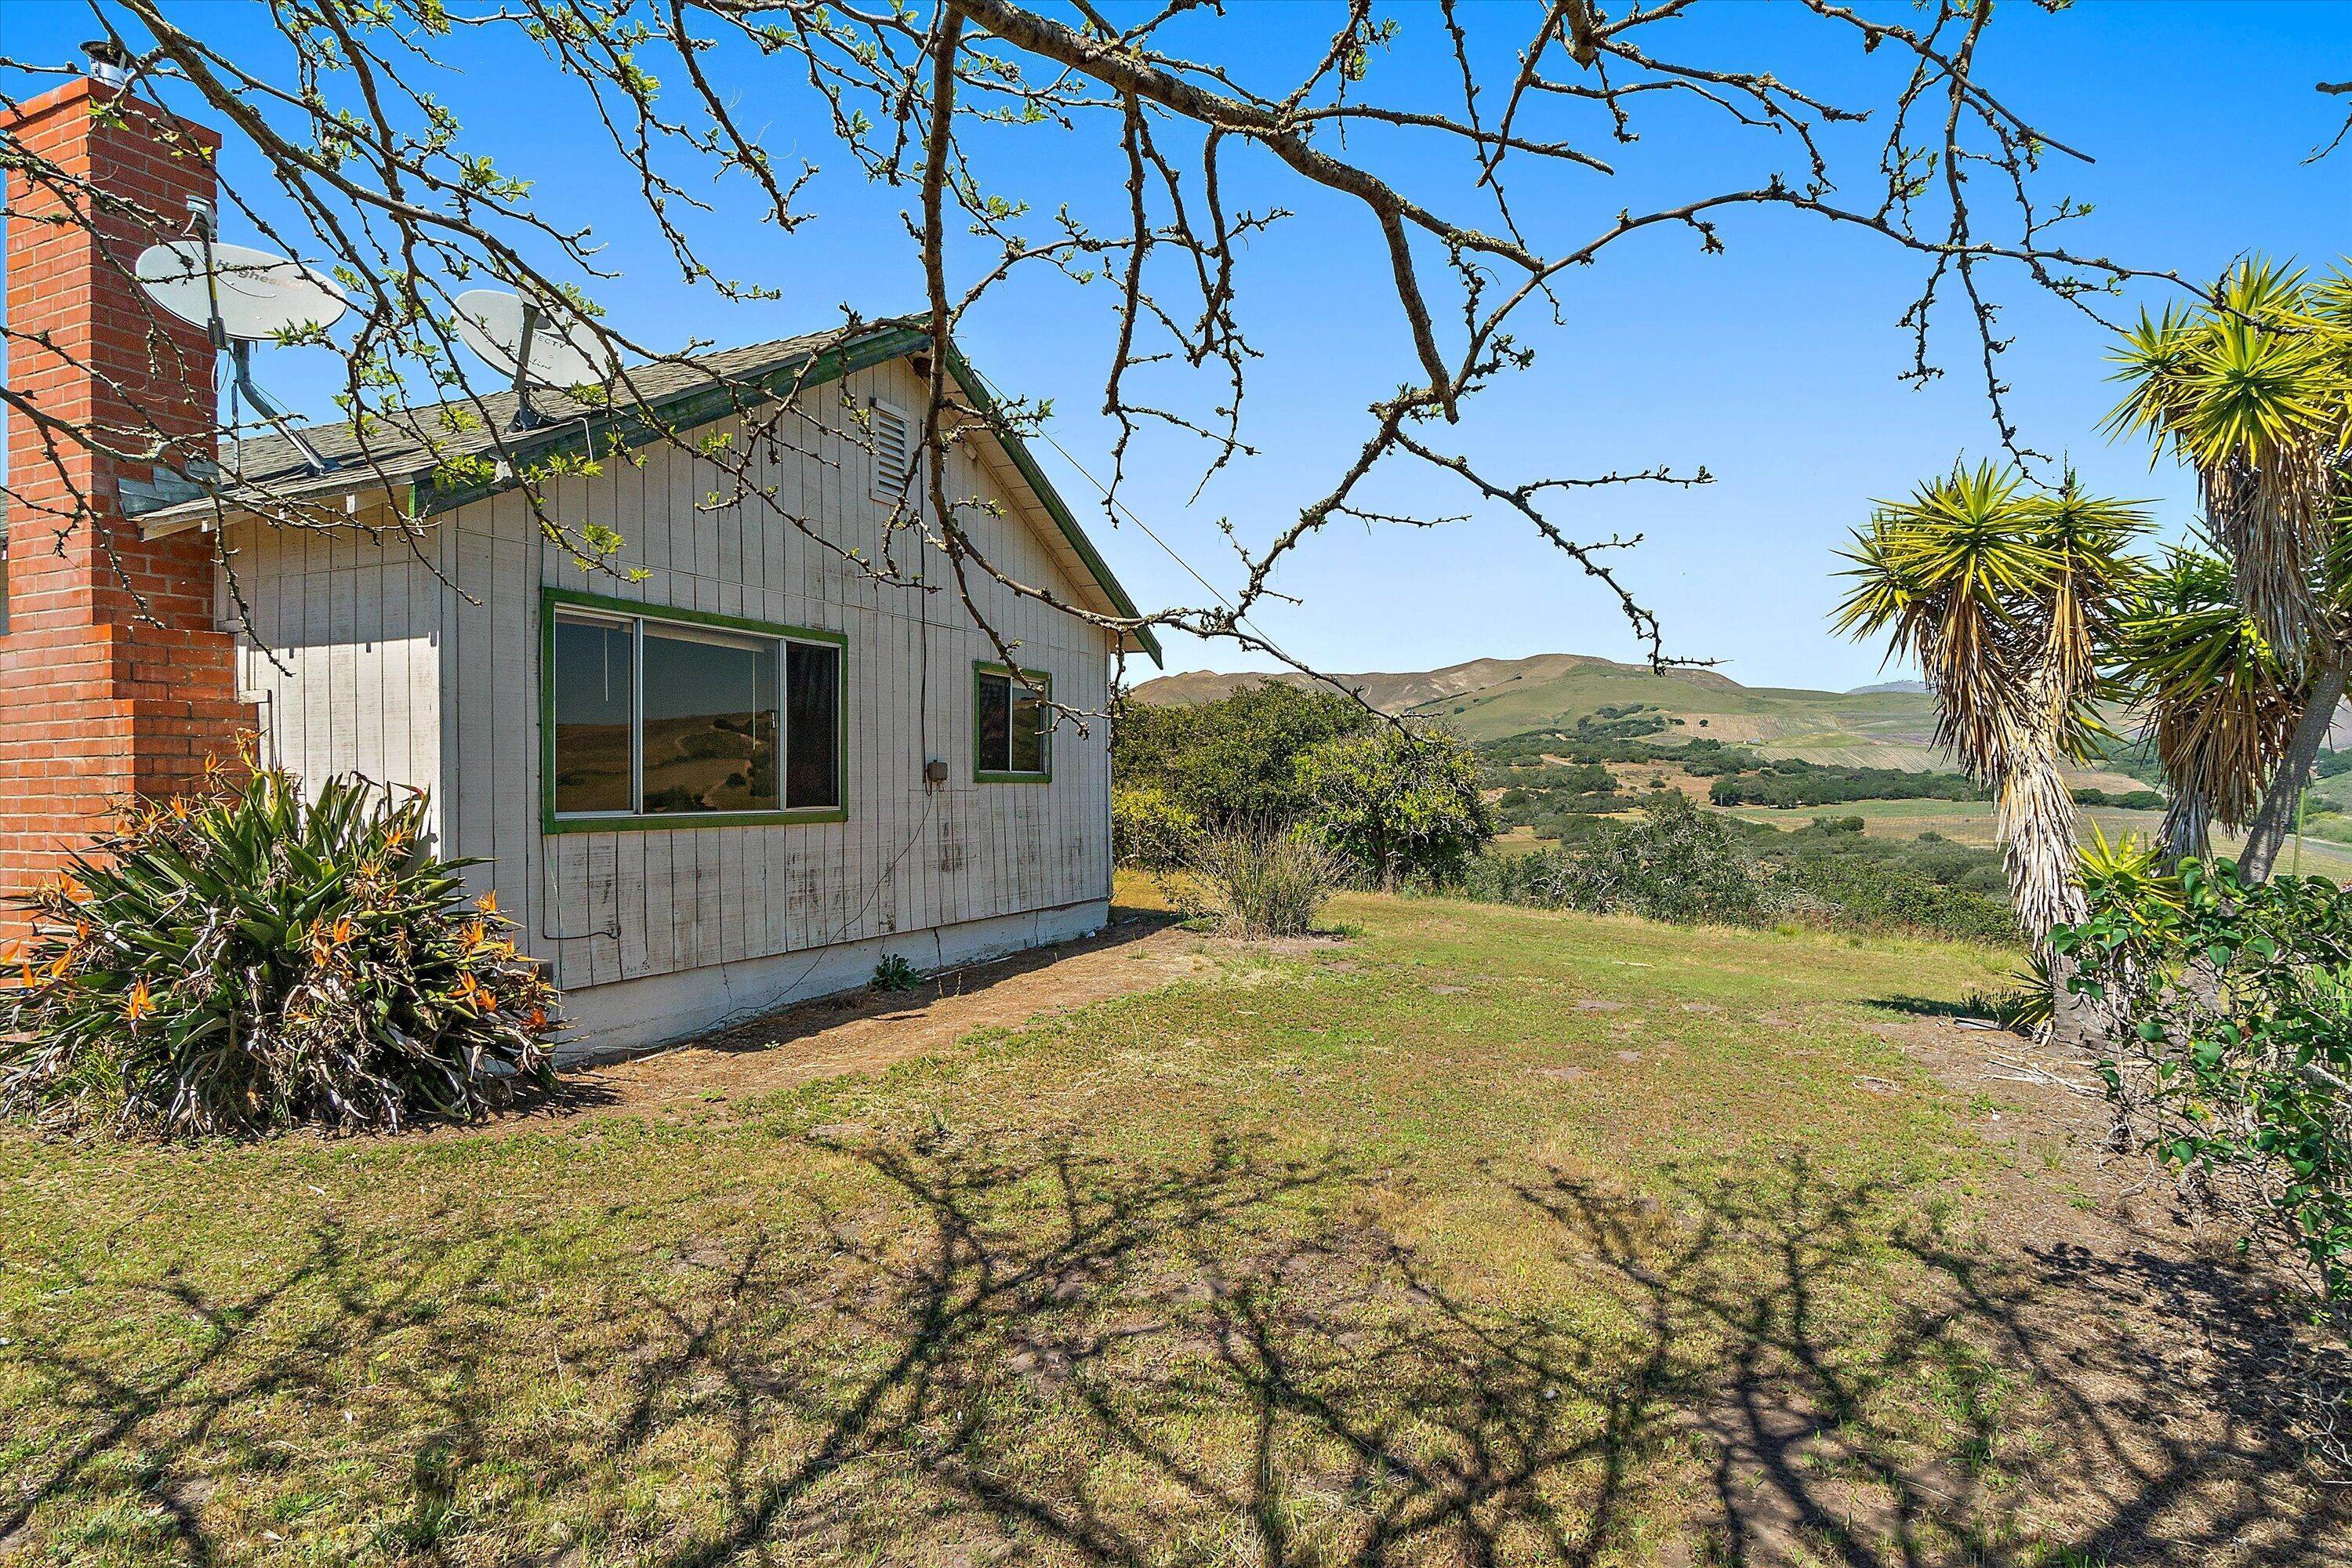 Farm and Ranch Properties for Sale at 6060 E Highway 246 Lompoc, California 93436 United States